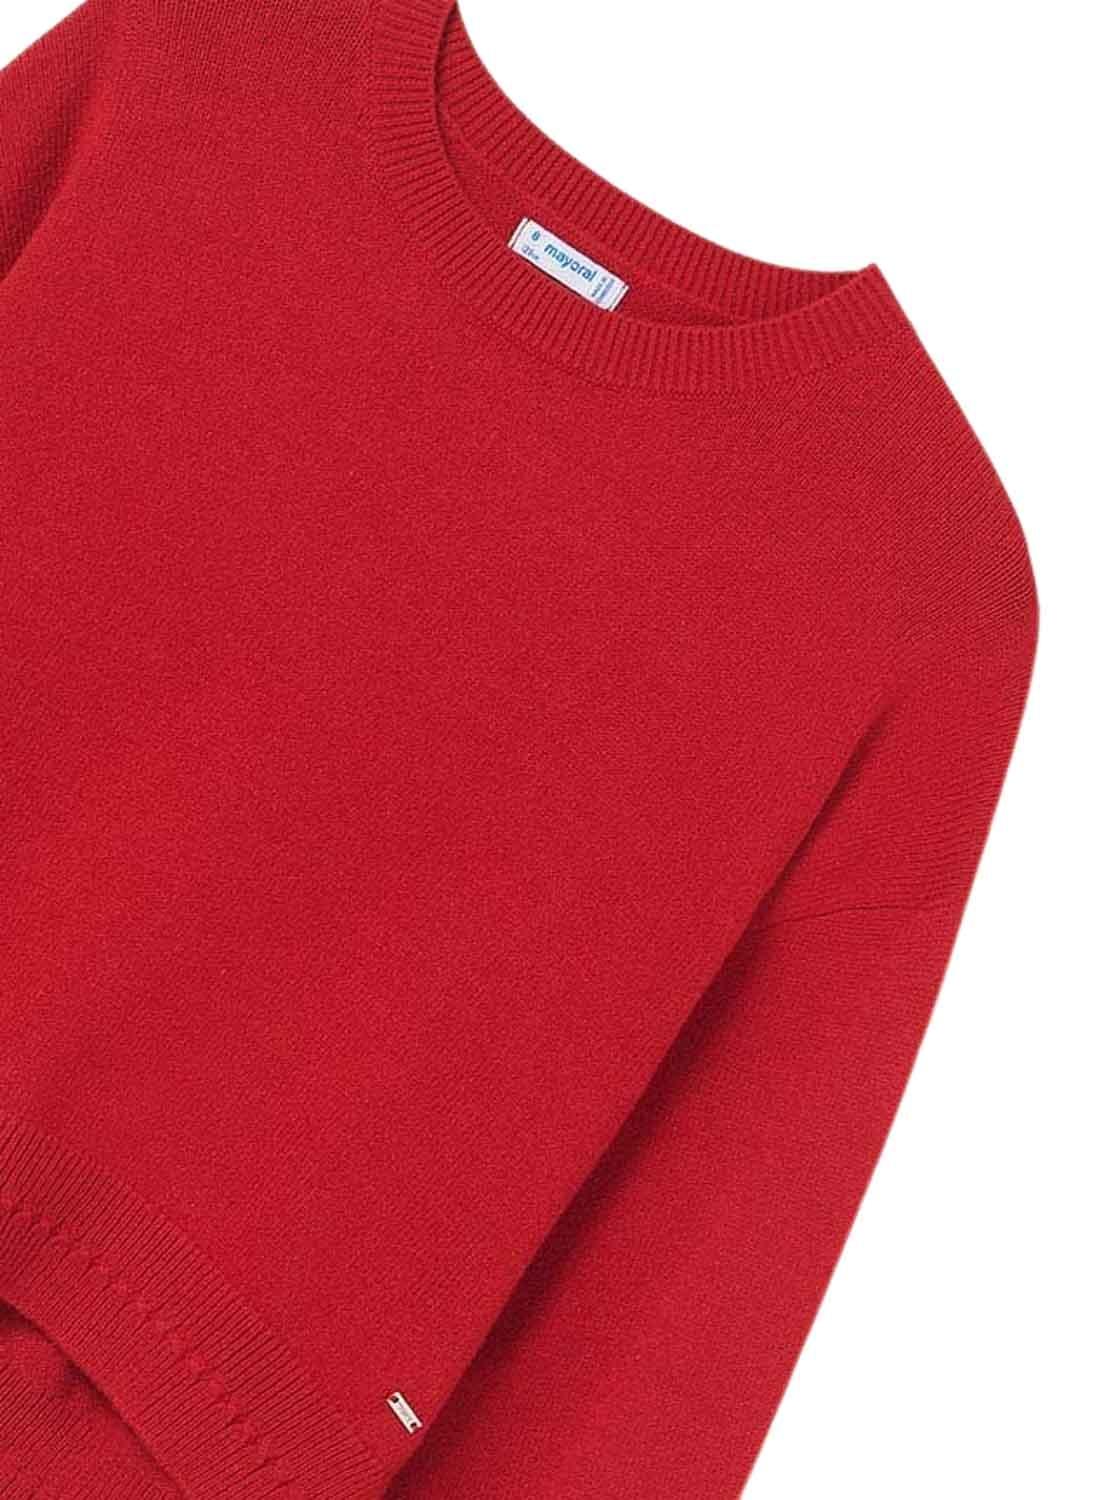 Pullover Mayoral Tricot Base Rosso per Bambina